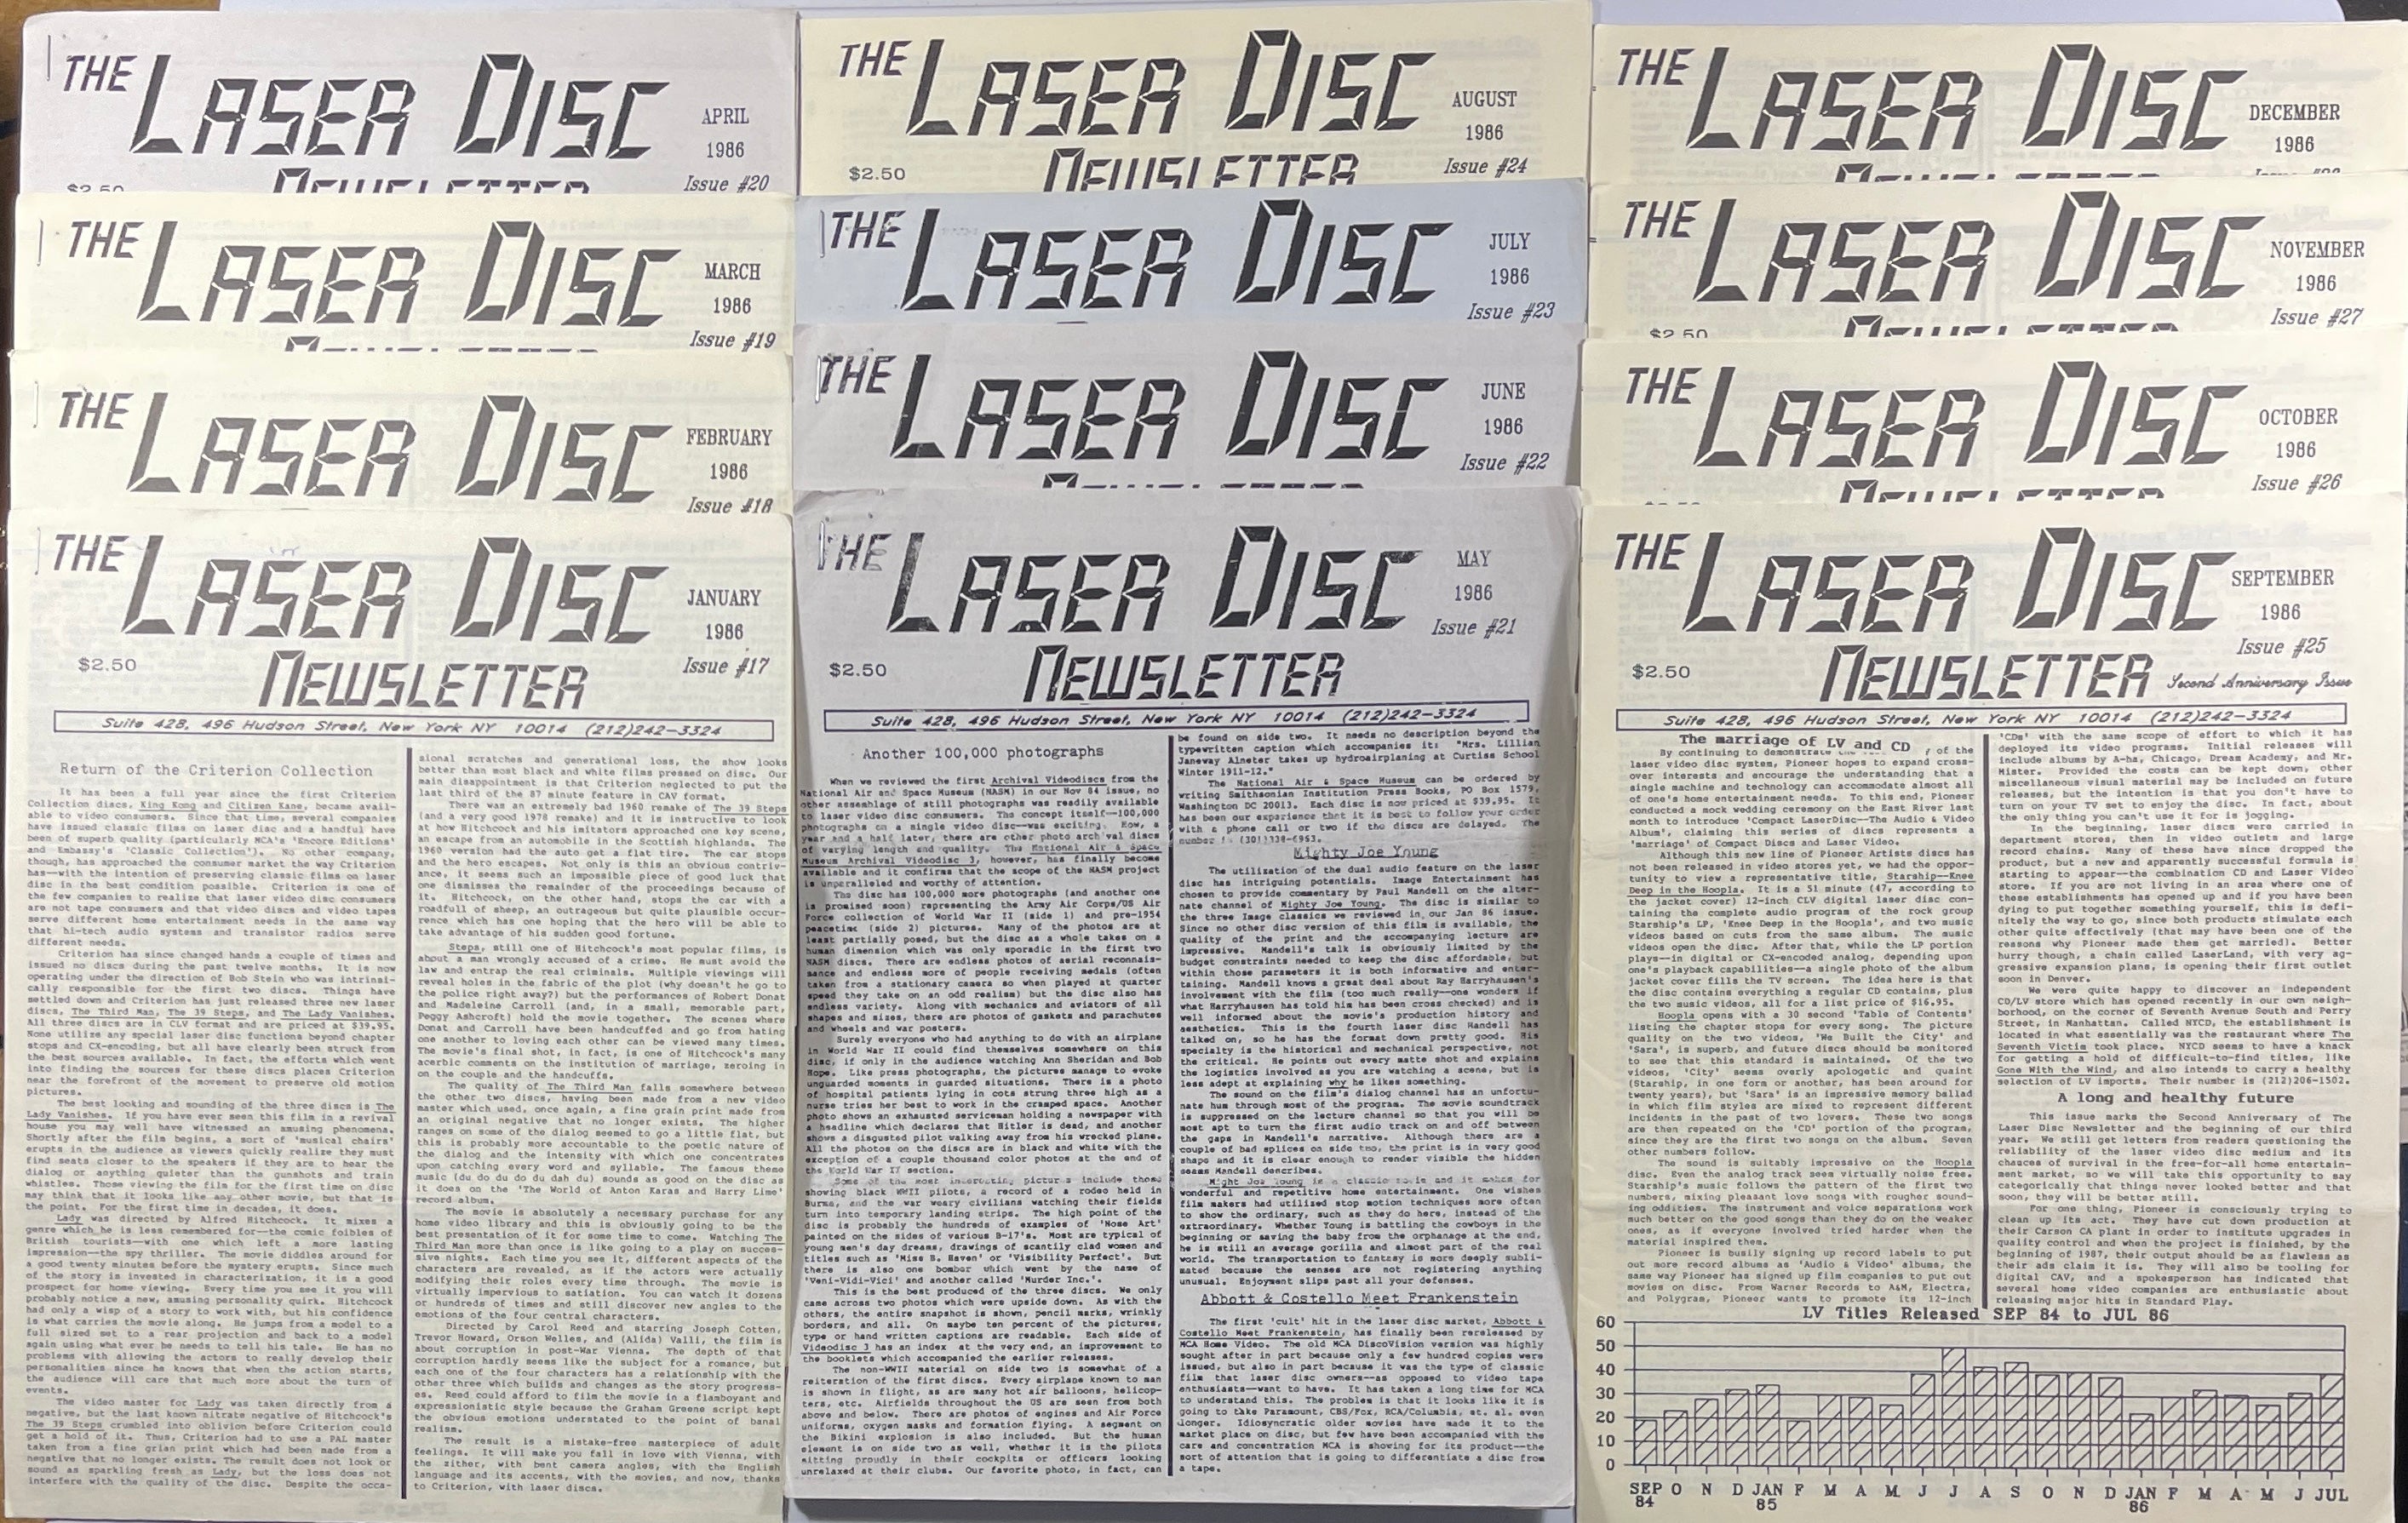 Laser Disc Newsletter - 1986 Complete Year - 12 Issues at Adirondack Retro